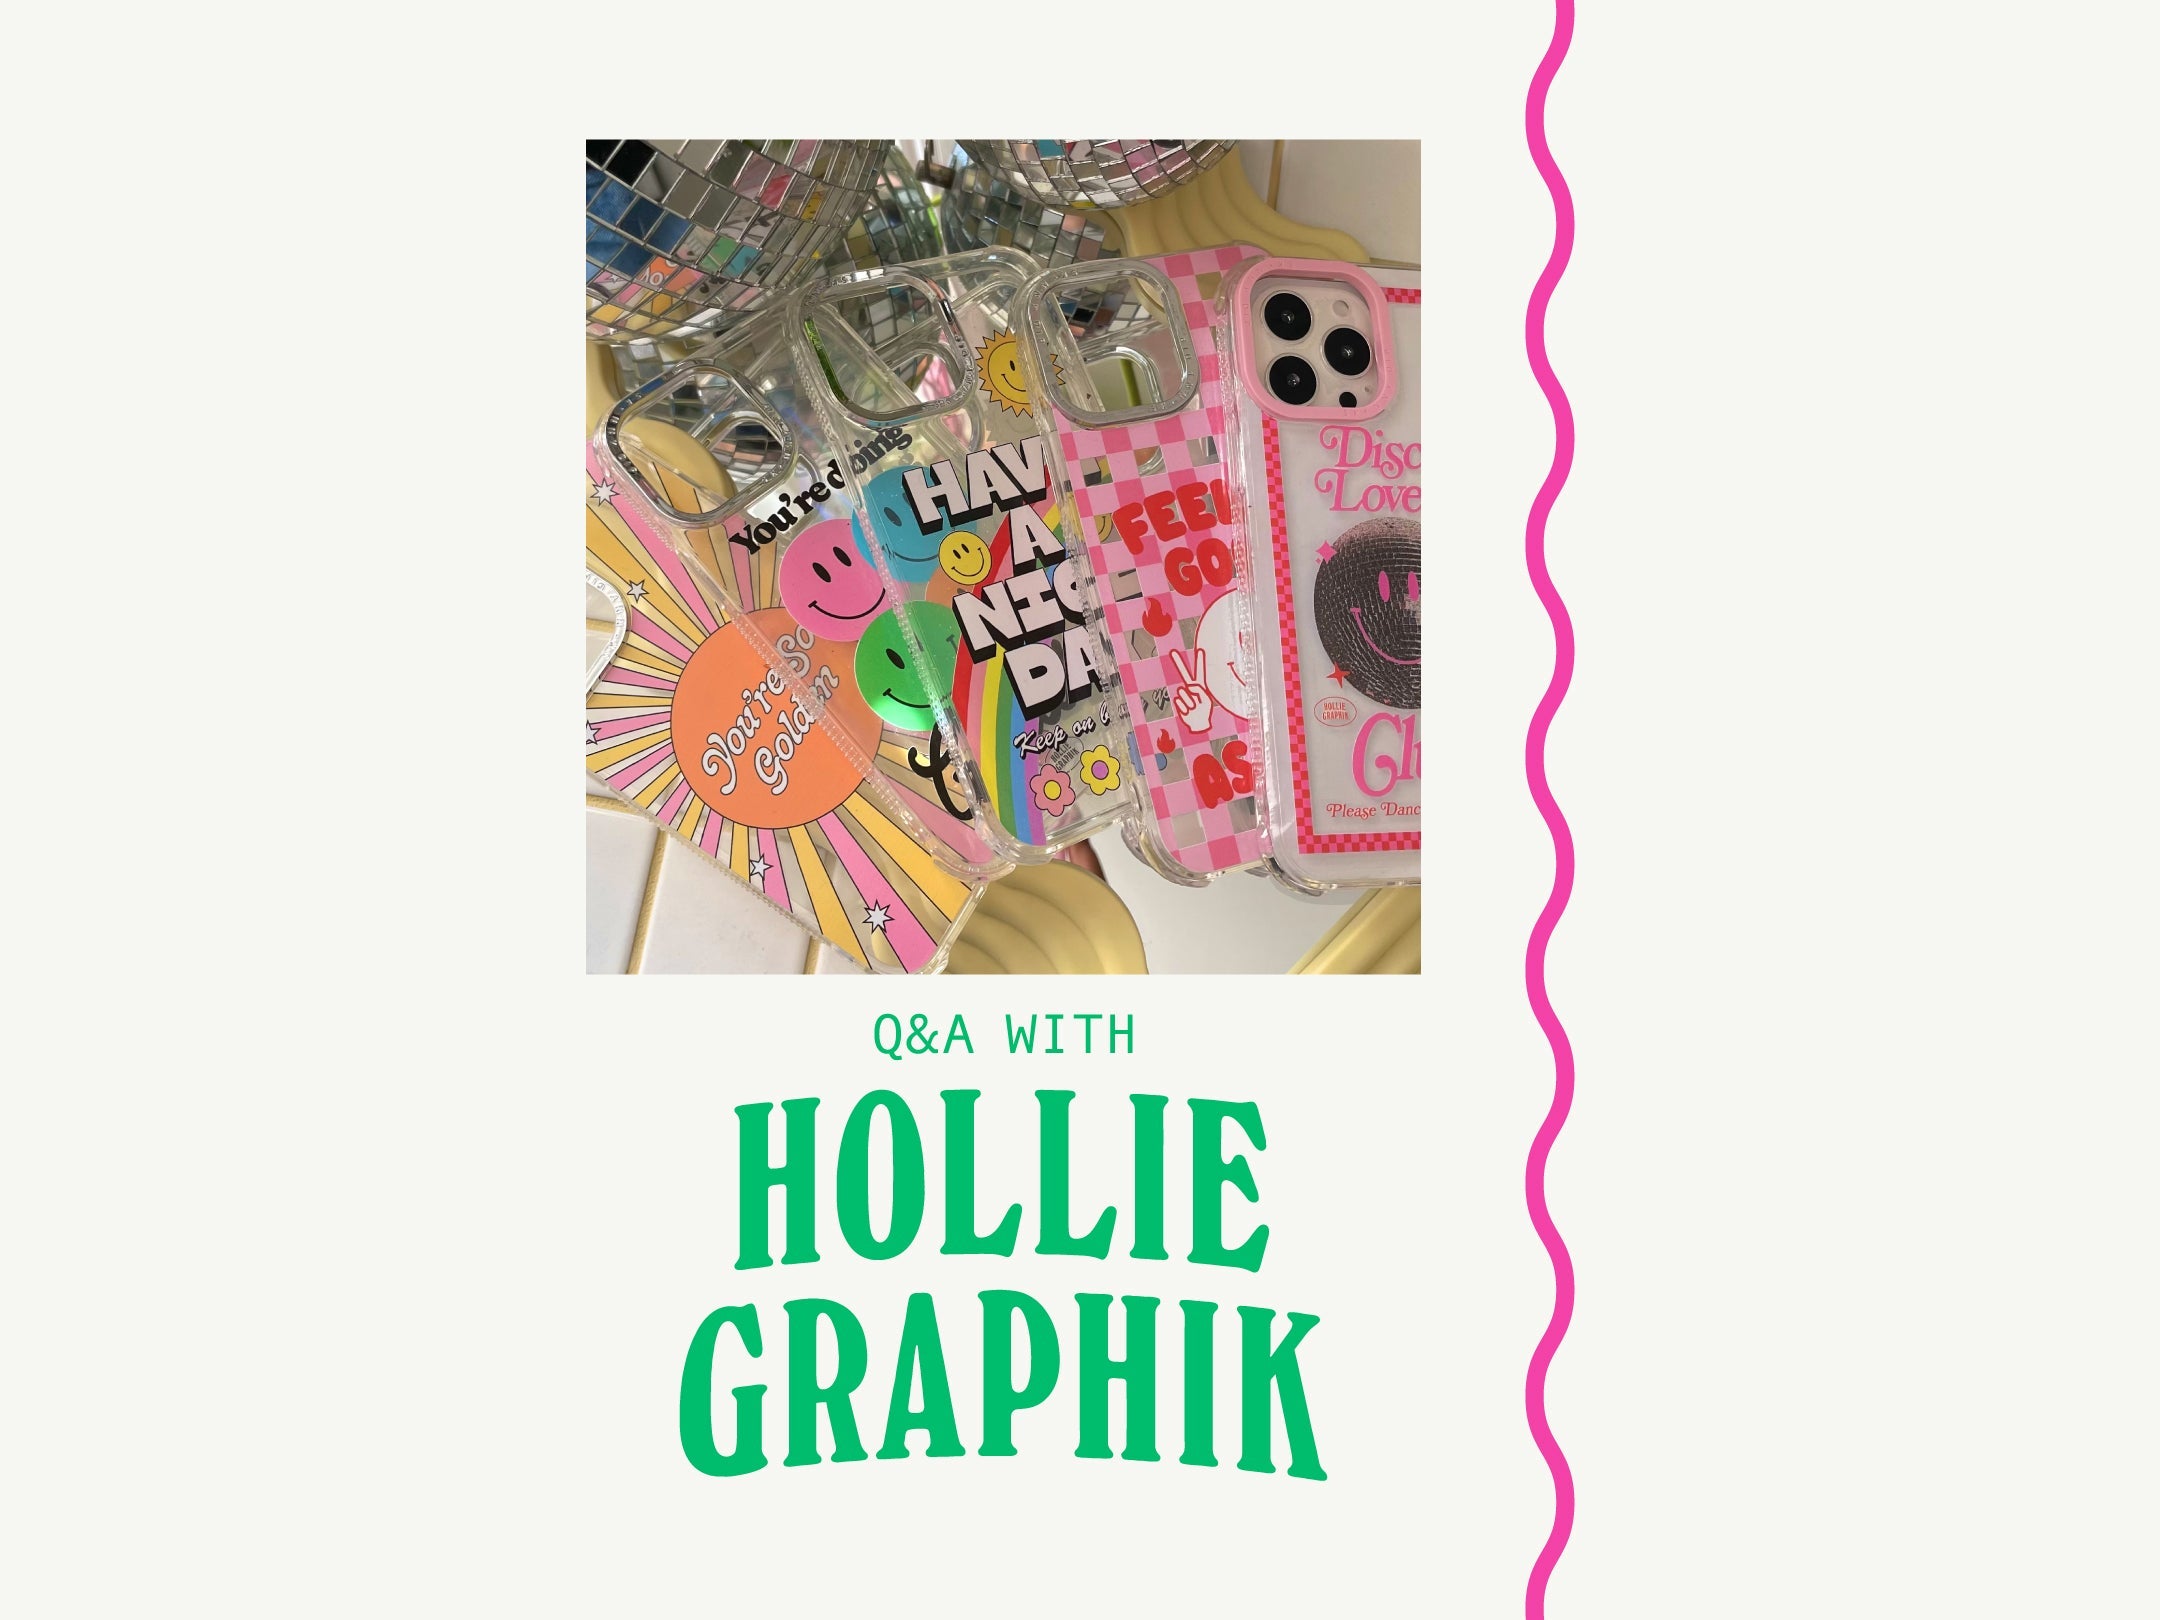 Q&A with Hollie Graphik